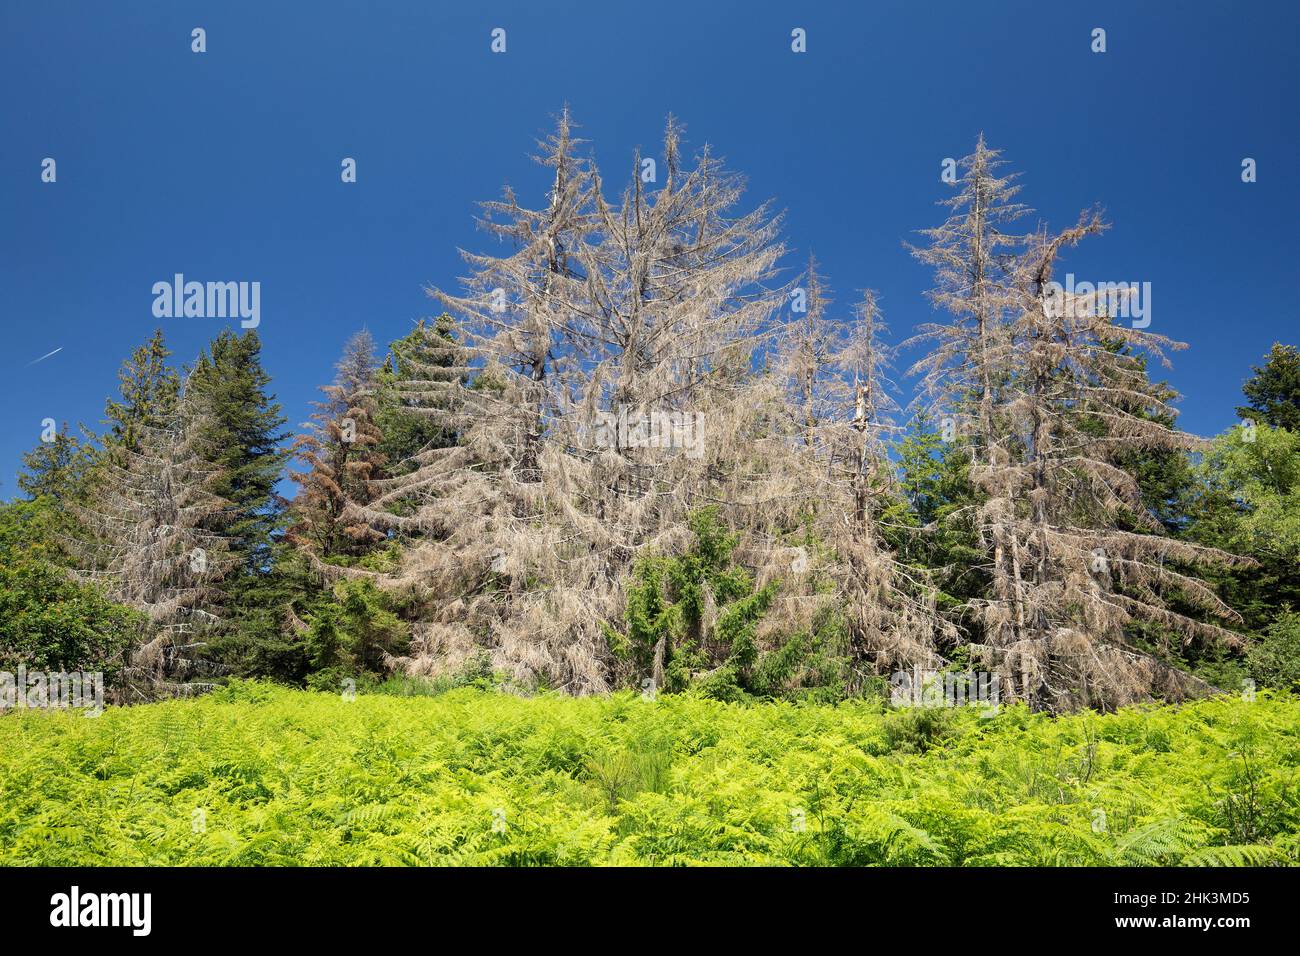 Common spruce (Picea abies) infested by European spruce bark beetle (Ips typographus), Vosges, France Stock Photo